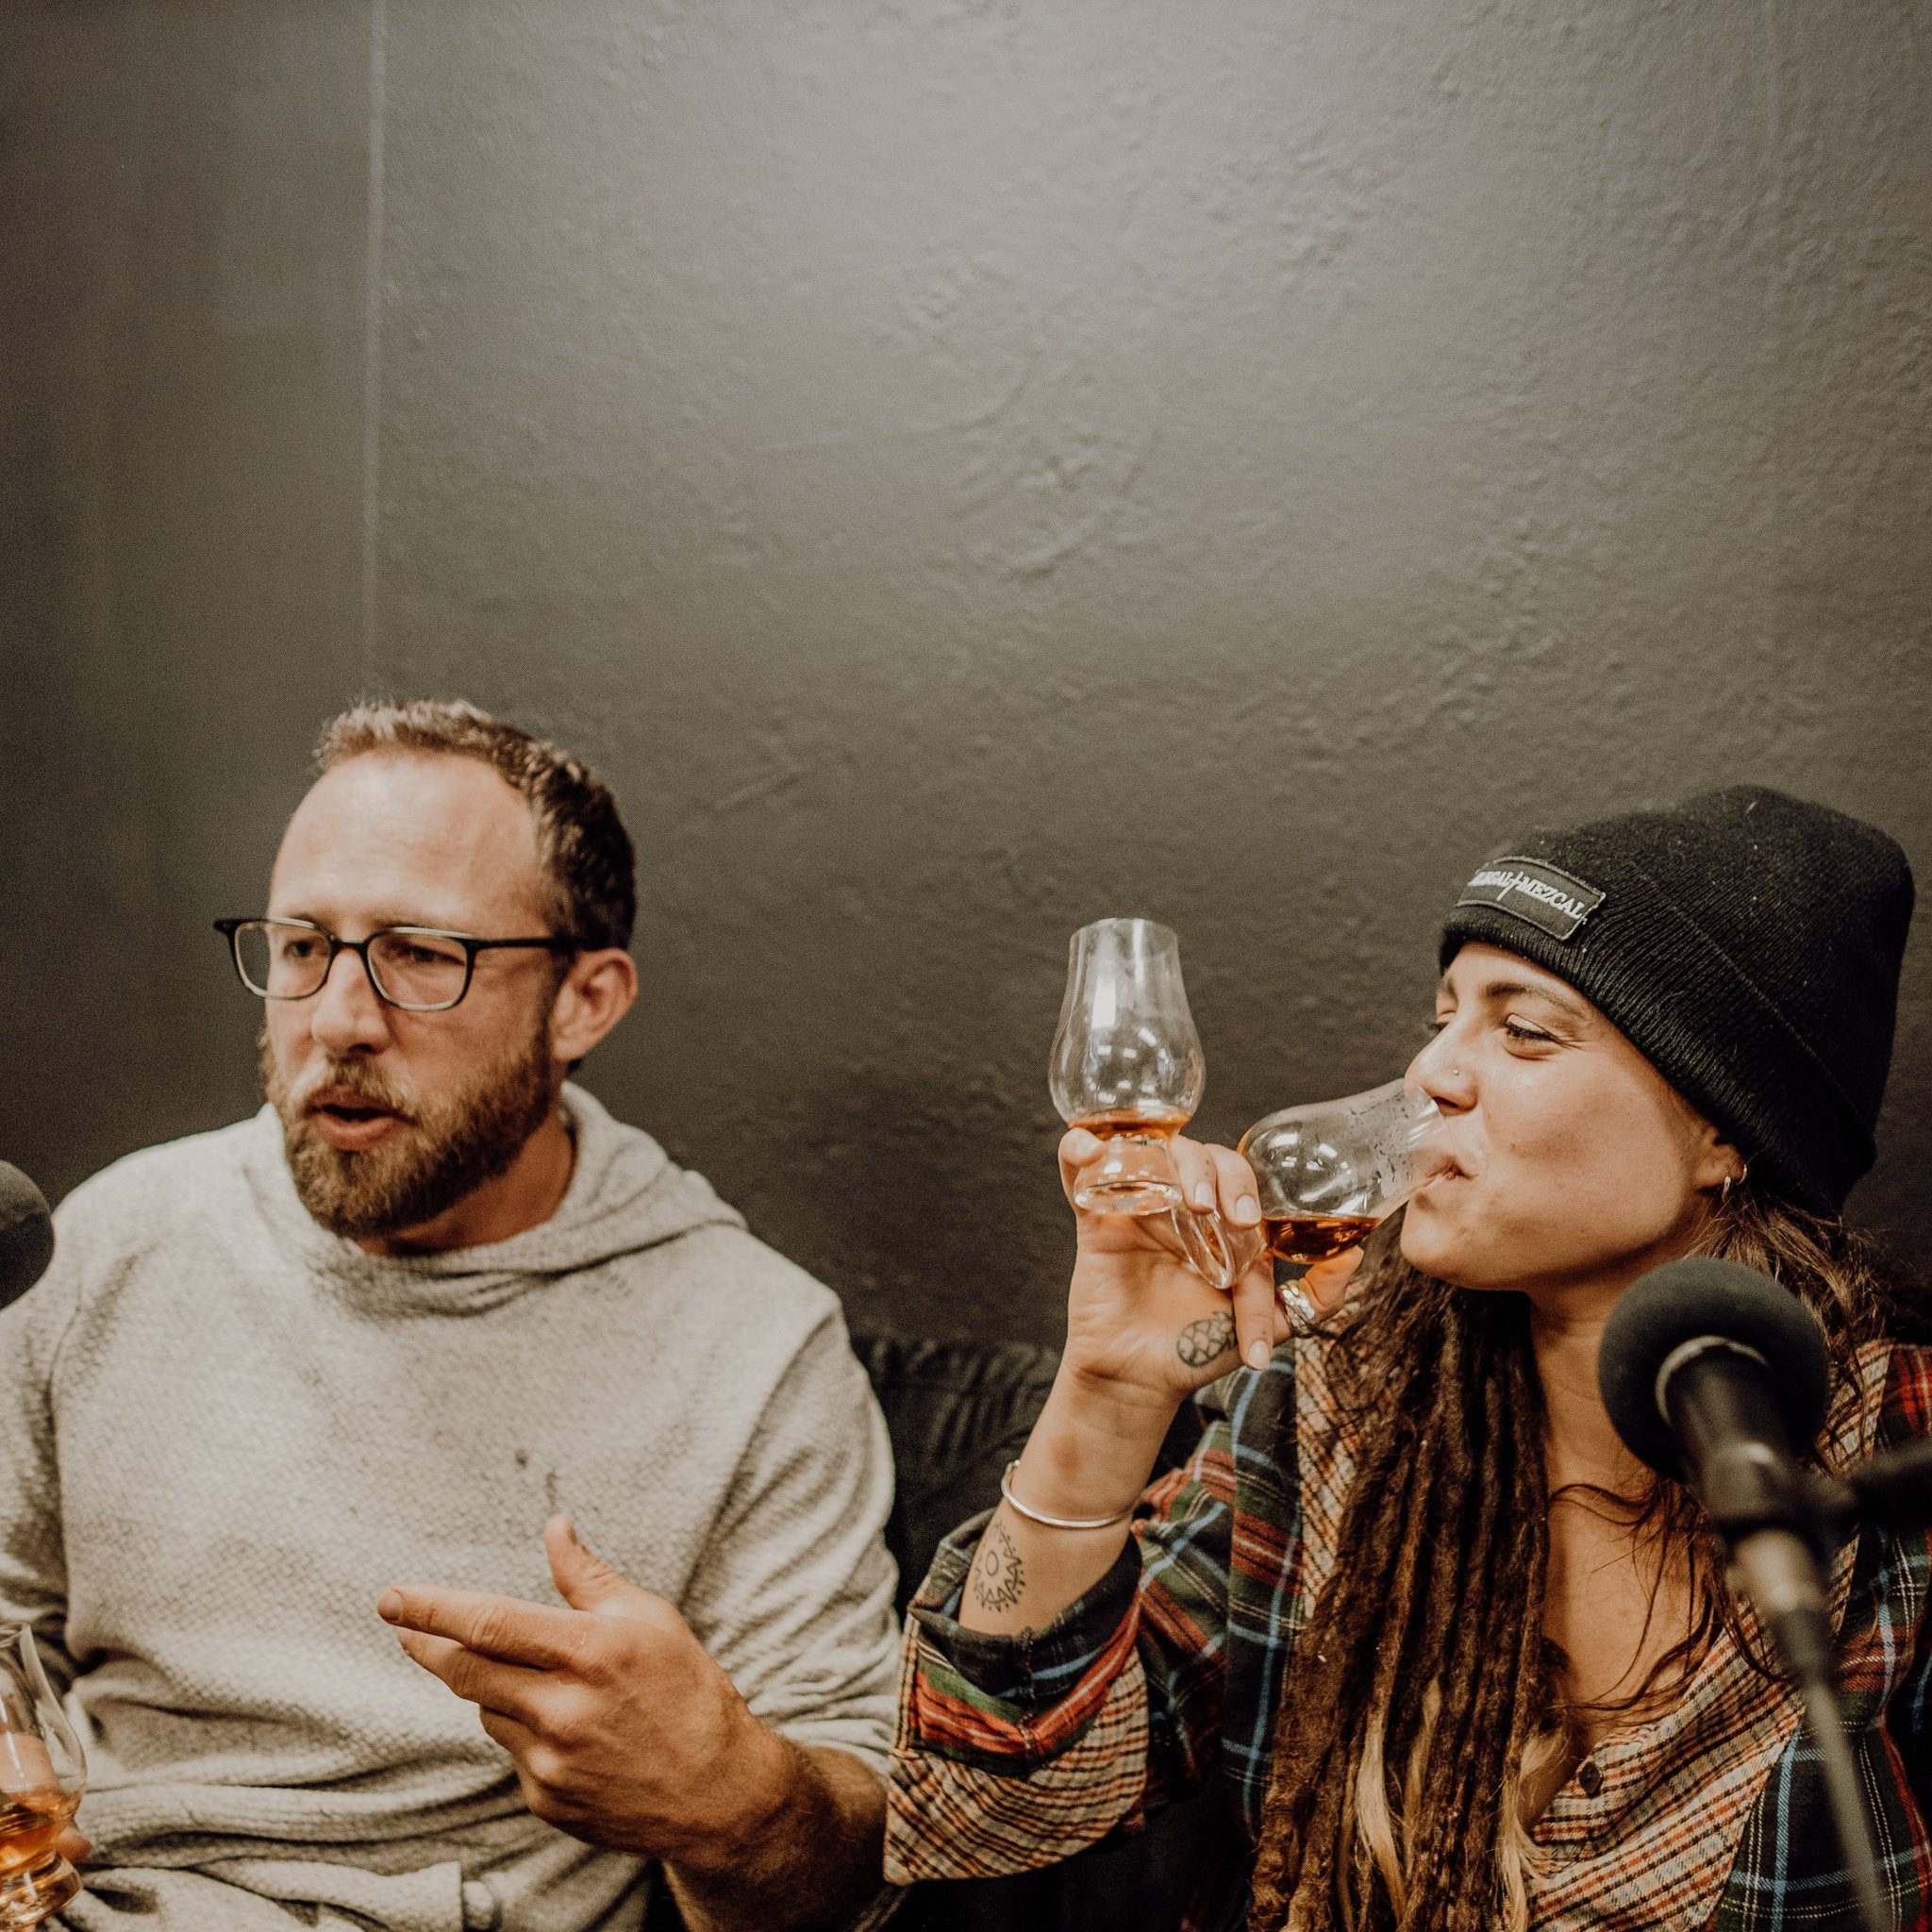 Send Whiskey Podcast #19 - Emily-Whiskey-Hands and Jeff On Running a Bar Post-Pandemic